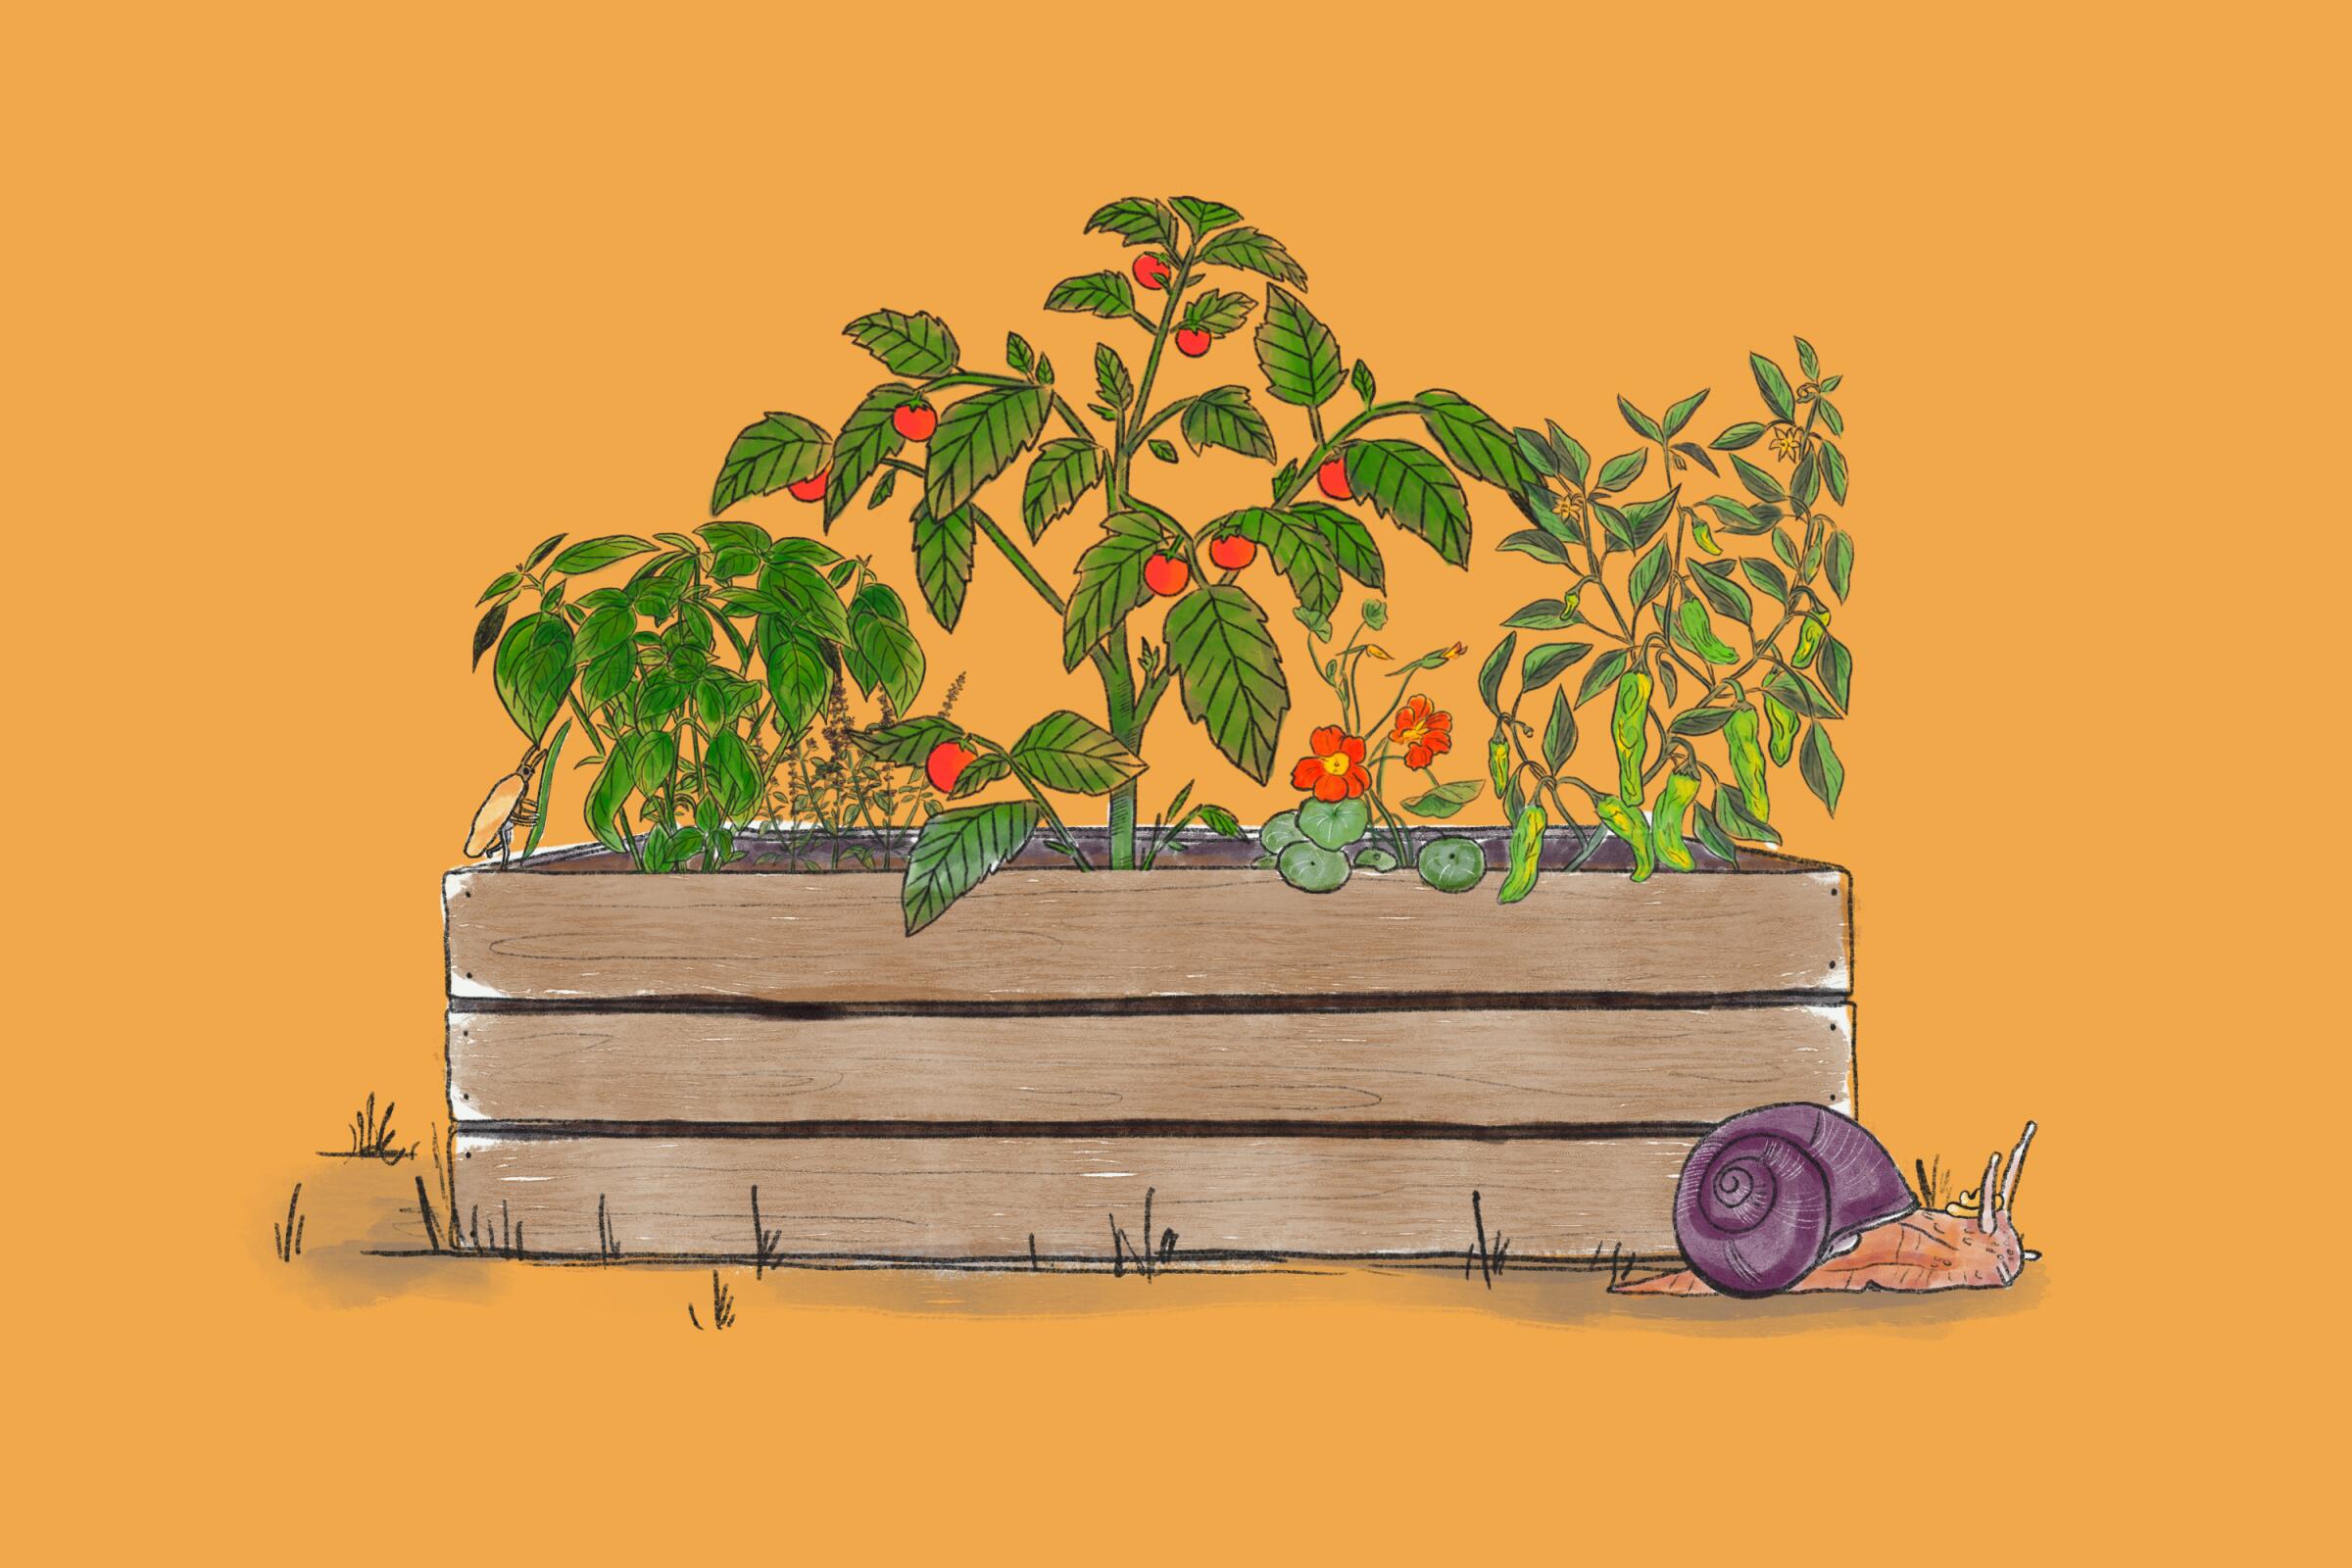 An illustration of a tomato plant and other leafy plants in a plant box with a snail in front.